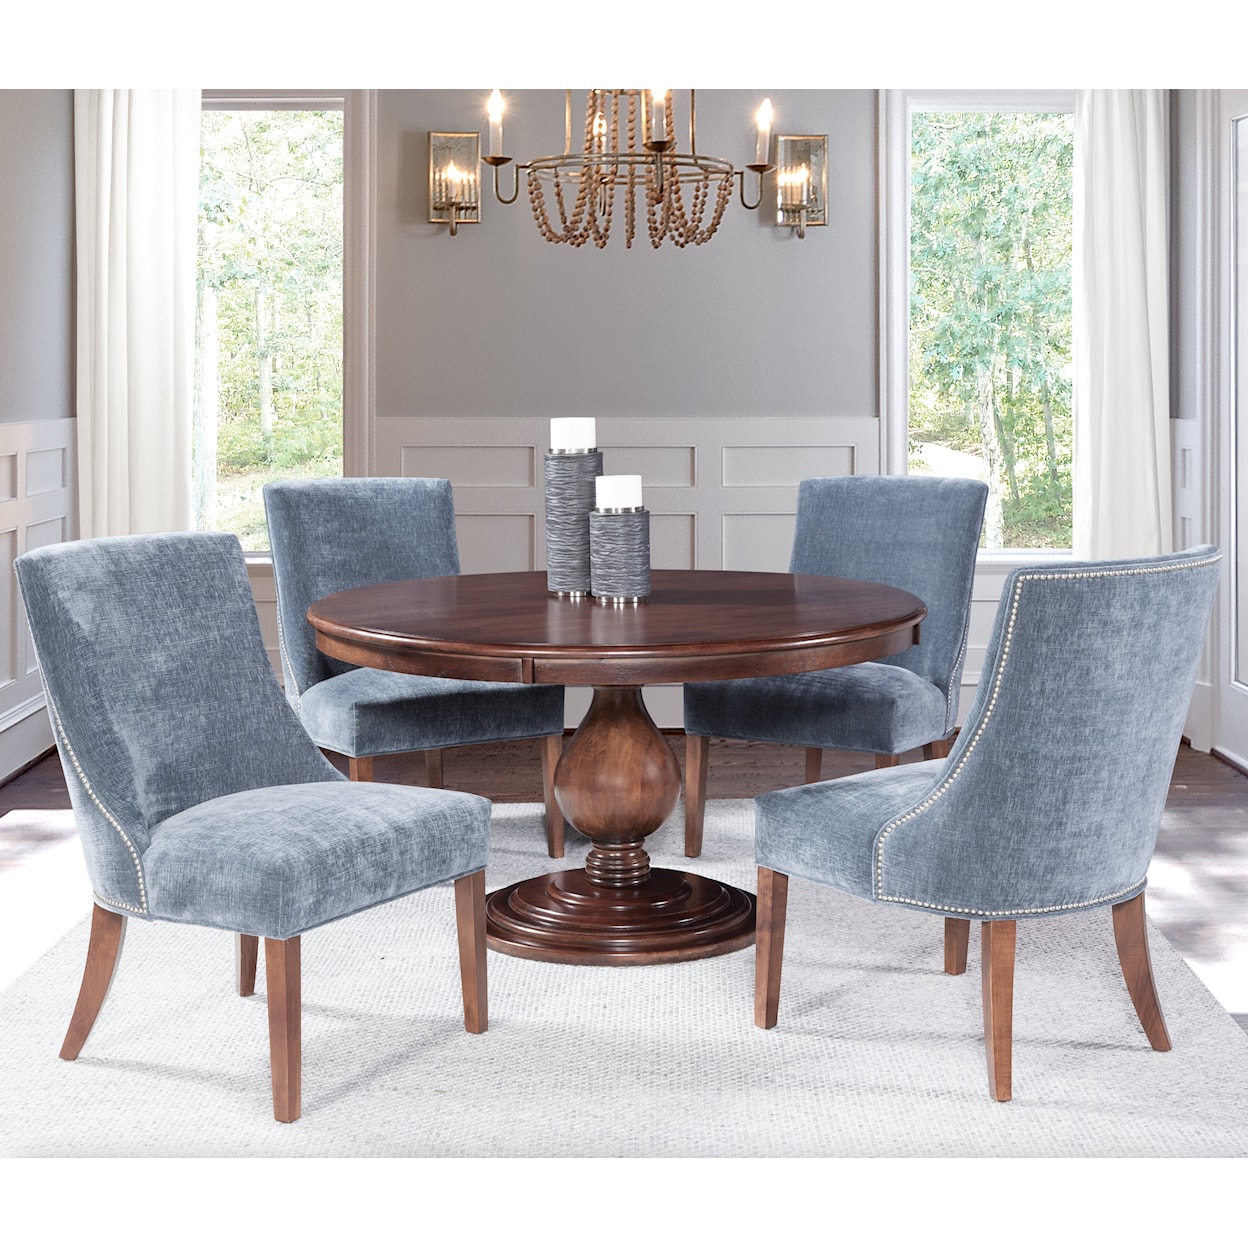 Braxton Culler Tuxedo Upholstered Dining Chair with Nailhead Trim